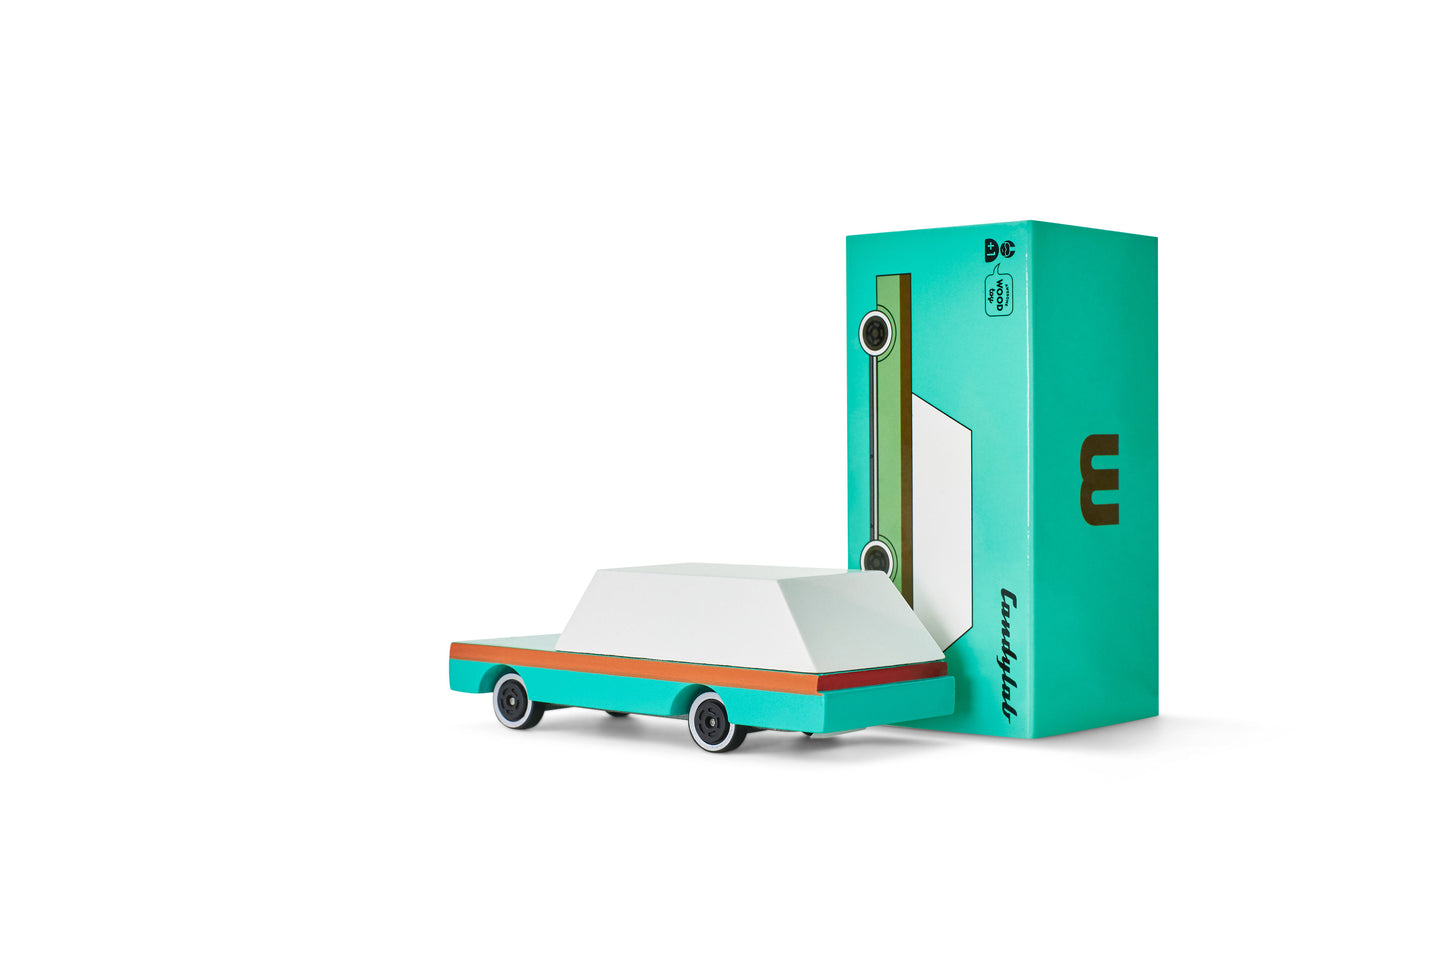 A candycar Teal Wagon toy from the Pencil Me In stationery shop